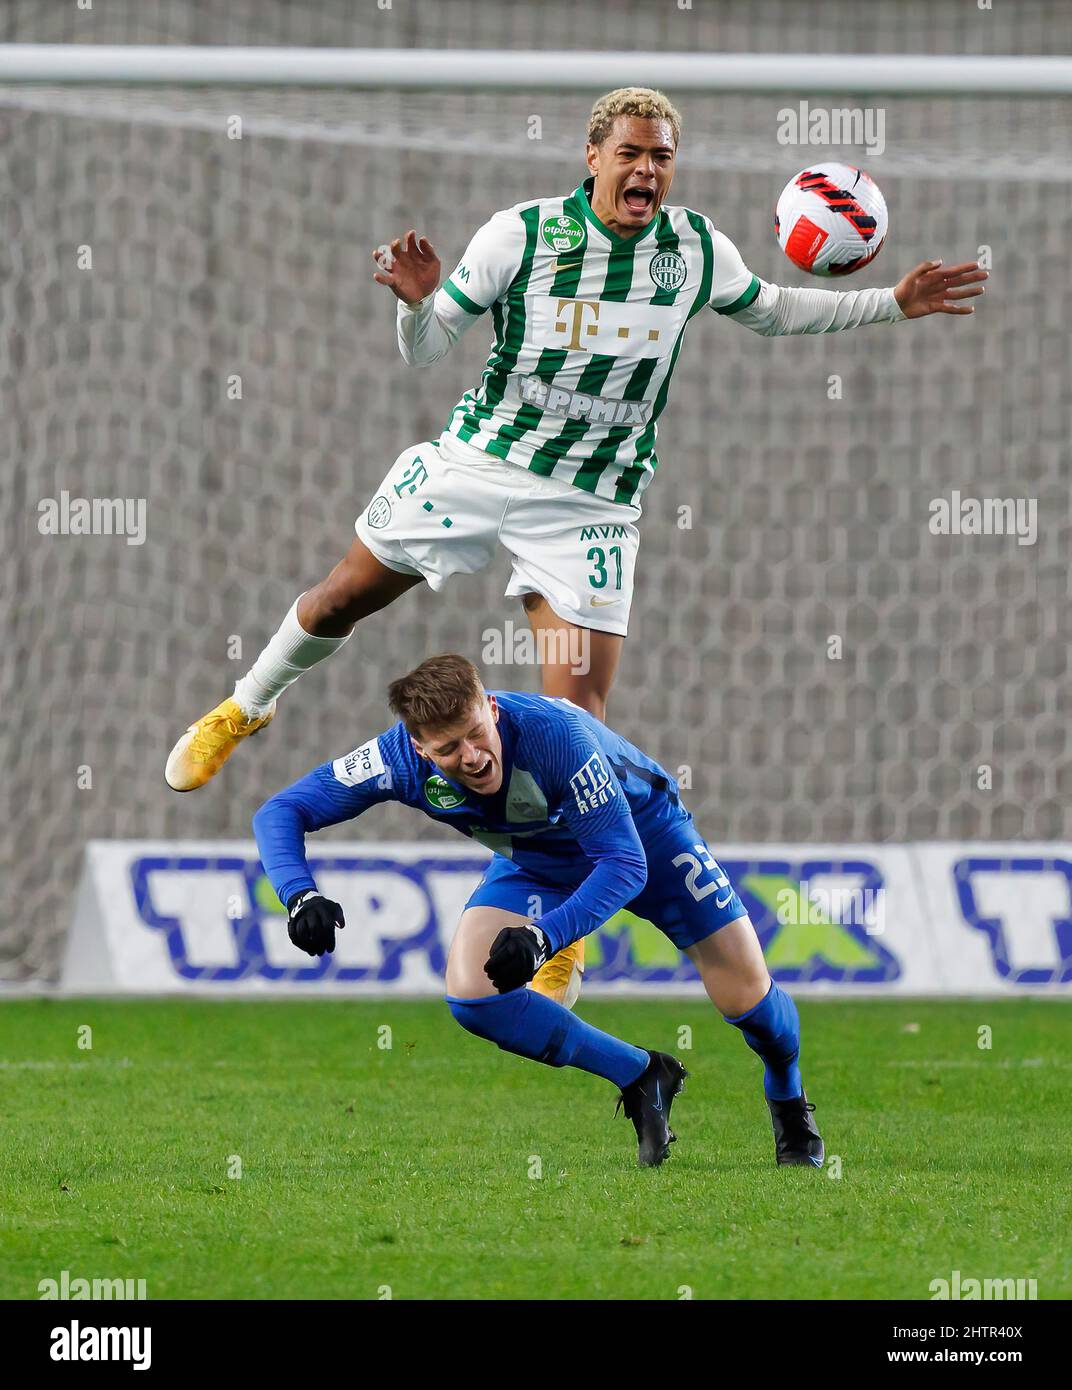 BUDAPEST, HUNGARY - FEBRUARY 5: Jose Marcos Marquinhos of Ferencvarosi TC  reacts during the Hungarian OTP Bank